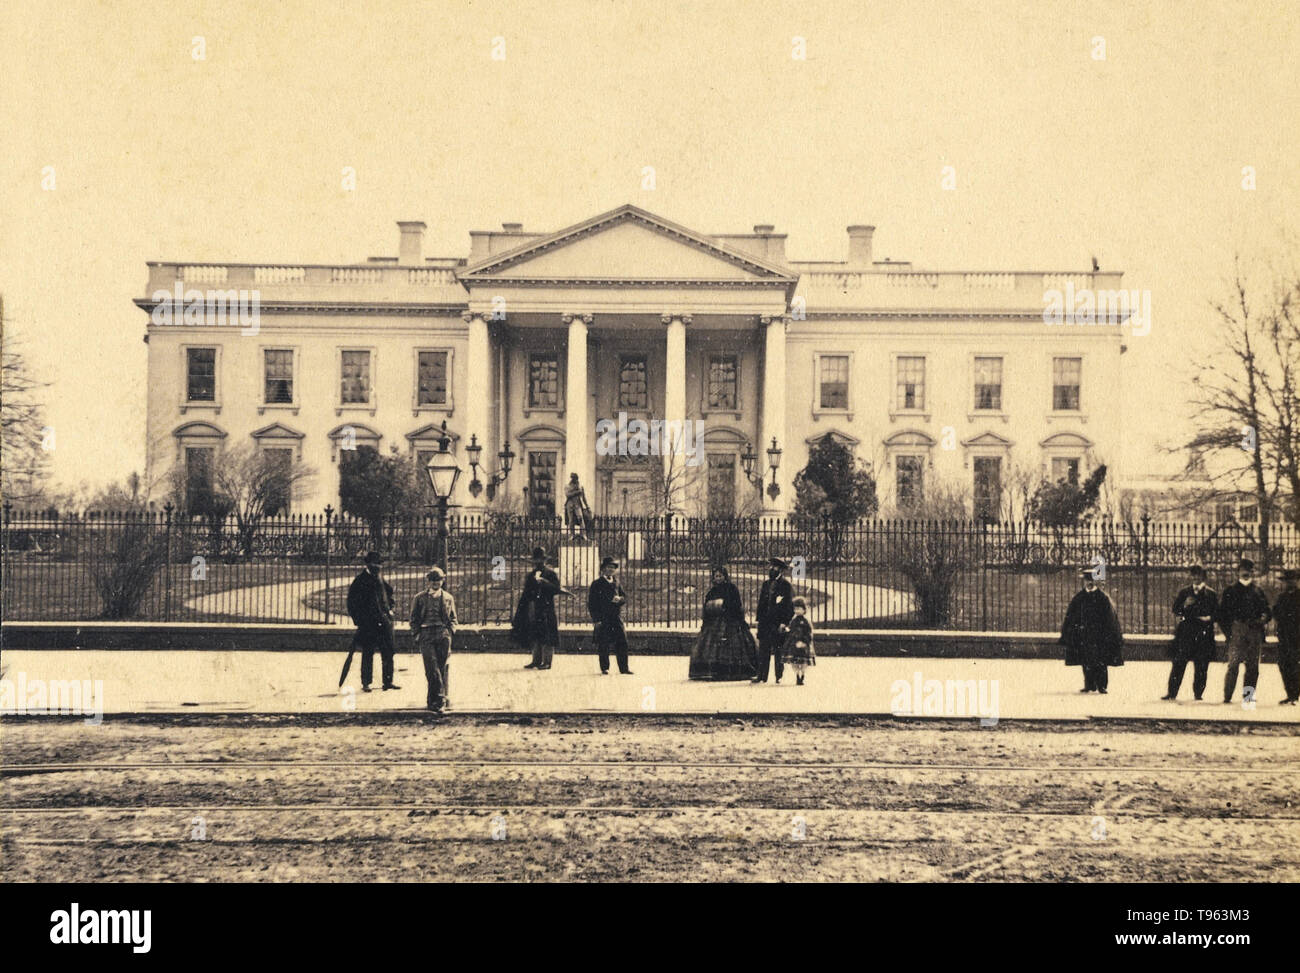 The White House in Washington D.C., 1866. Photographed by George D. Wakely (American, active 1856 - 1880). Albumen silver print. Stock Photo